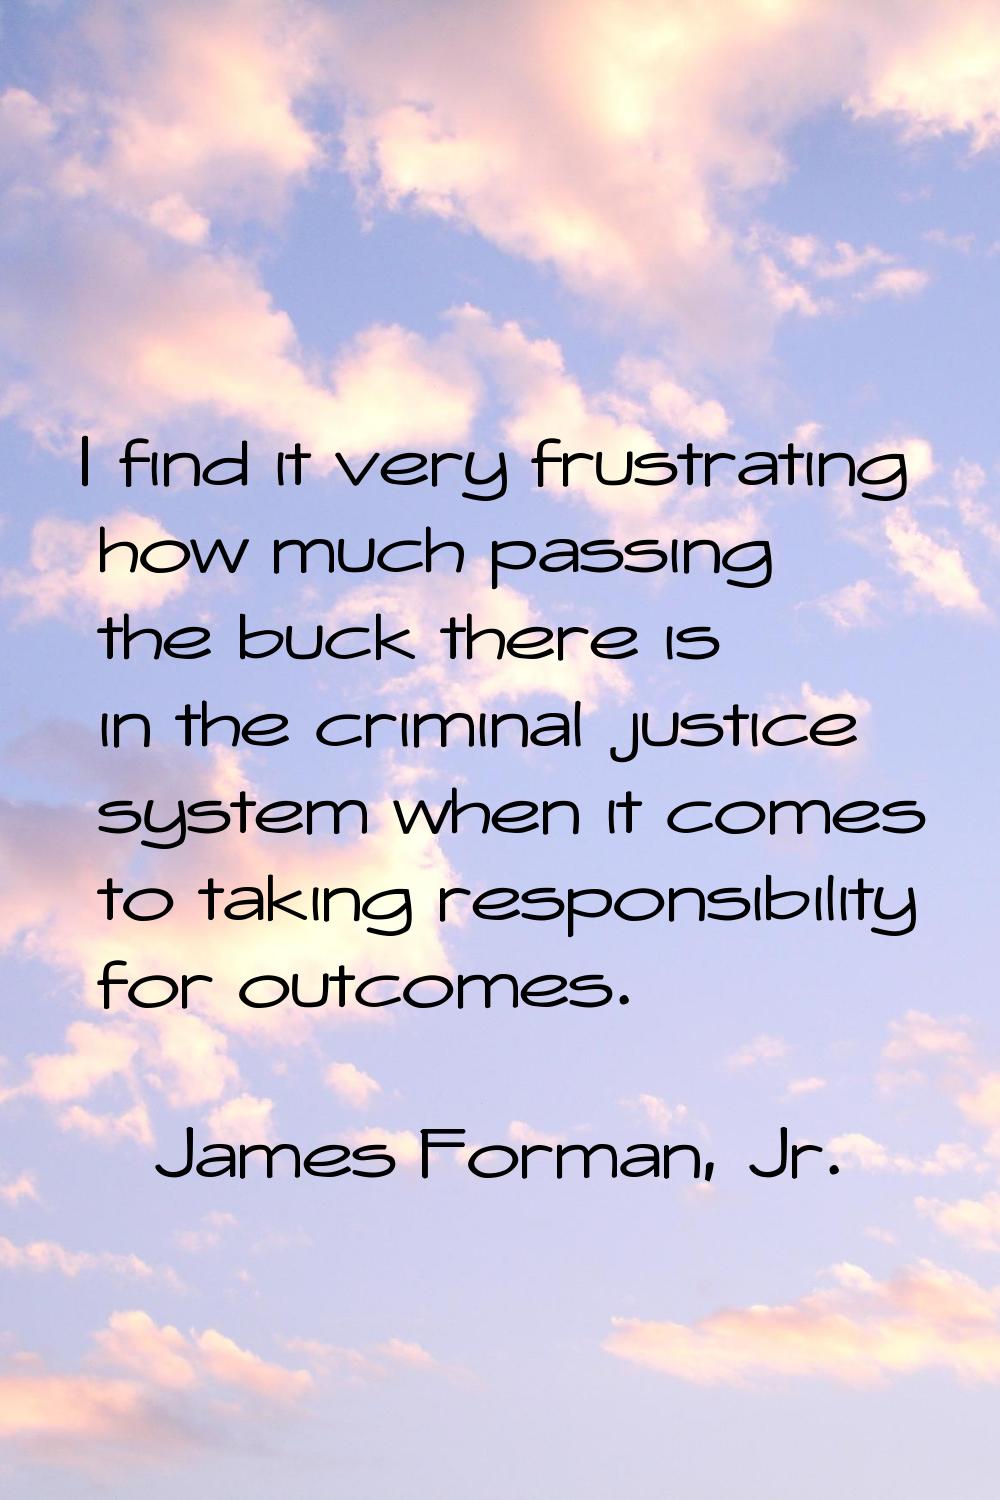 I find it very frustrating how much passing the buck there is in the criminal justice system when i